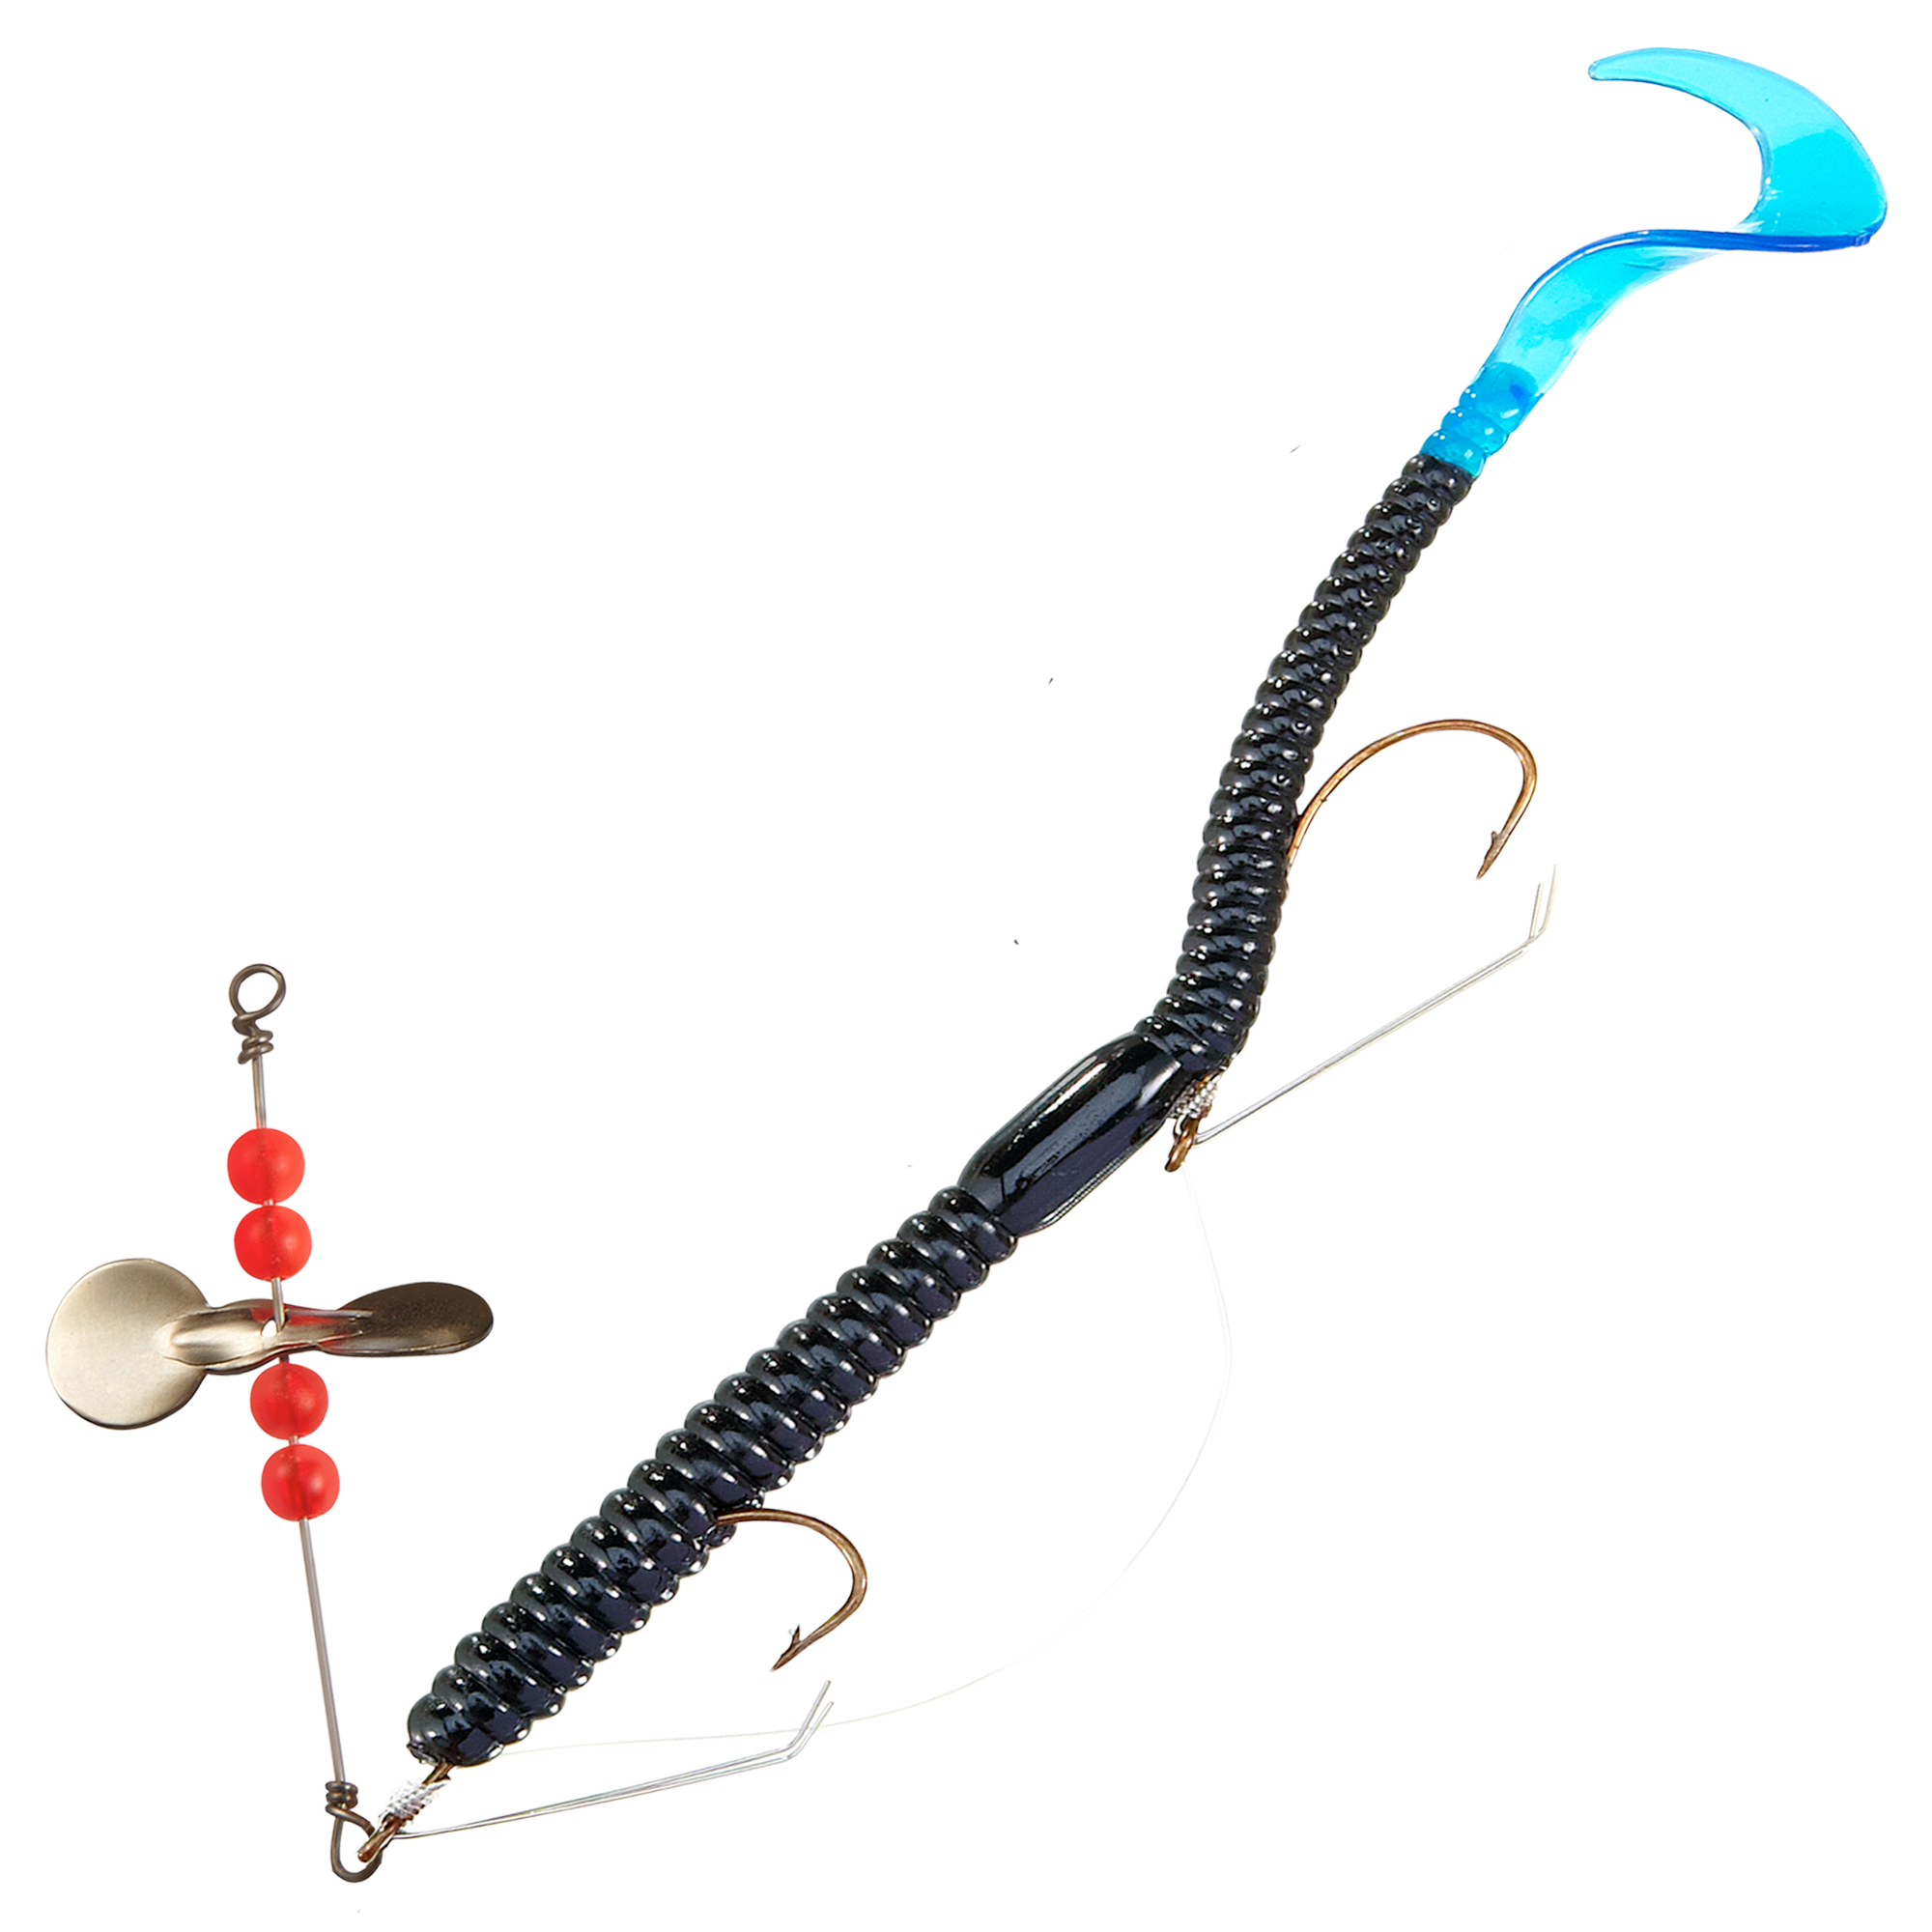 Creme Rigged Worm - Black/Blue Tail